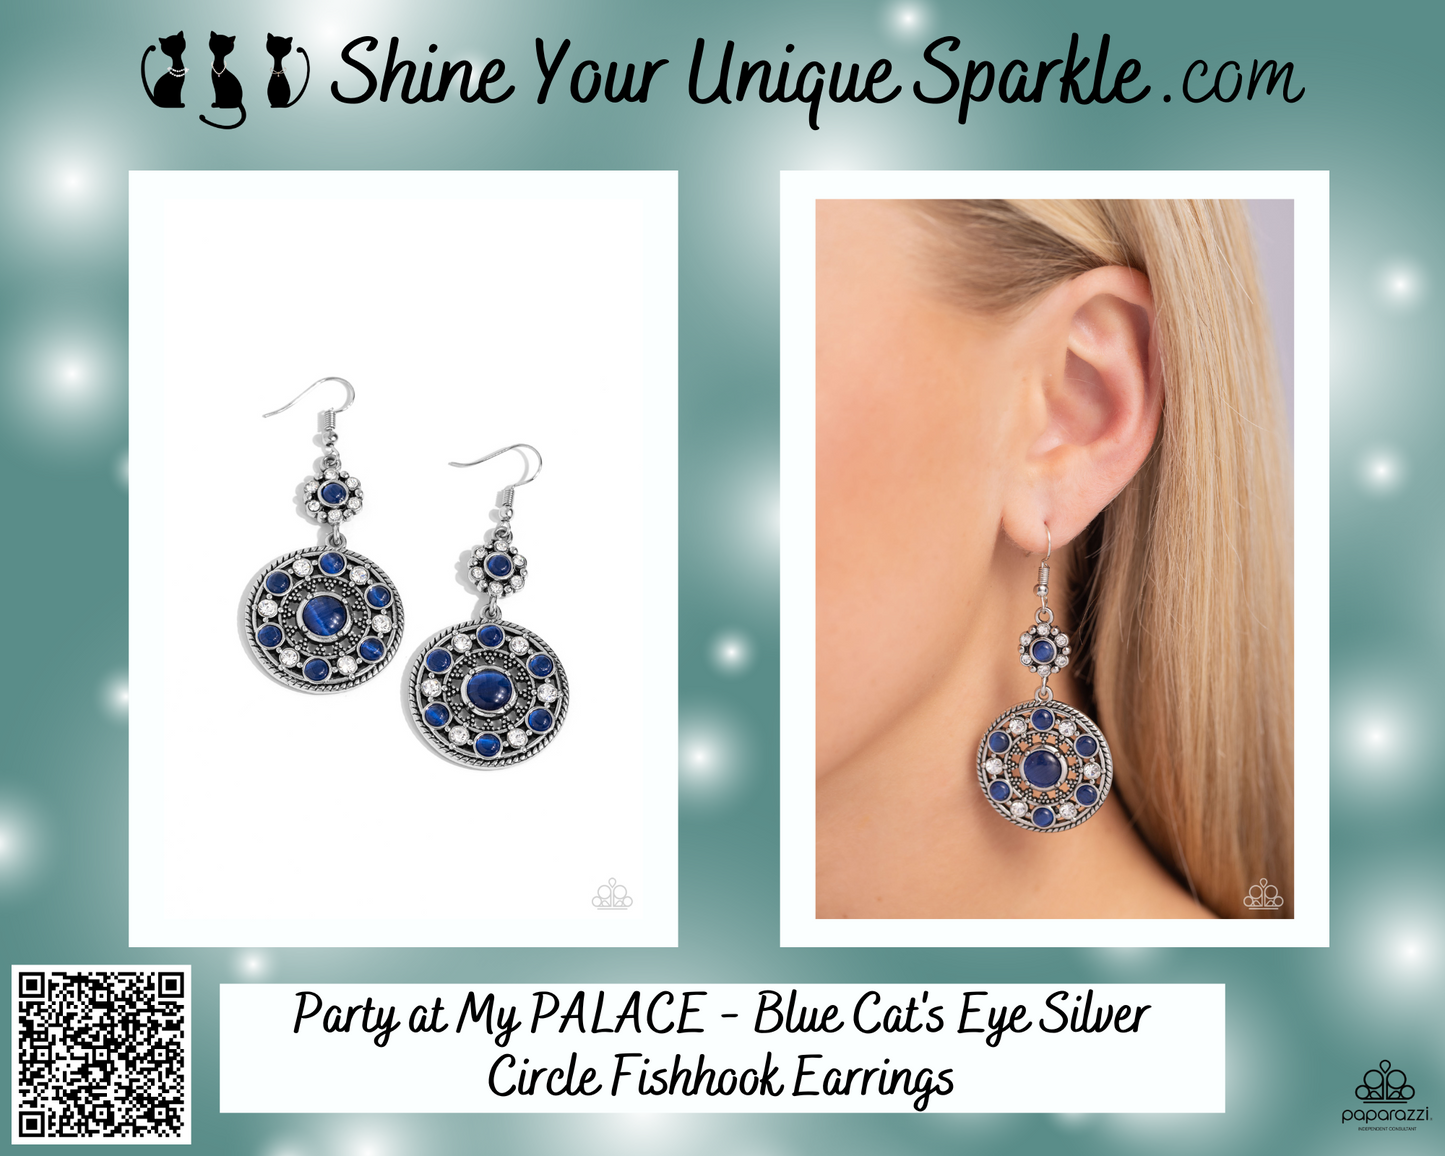 Party at My PALACE - Blue Cat's Eye Silver Circle Fishhook Earrings